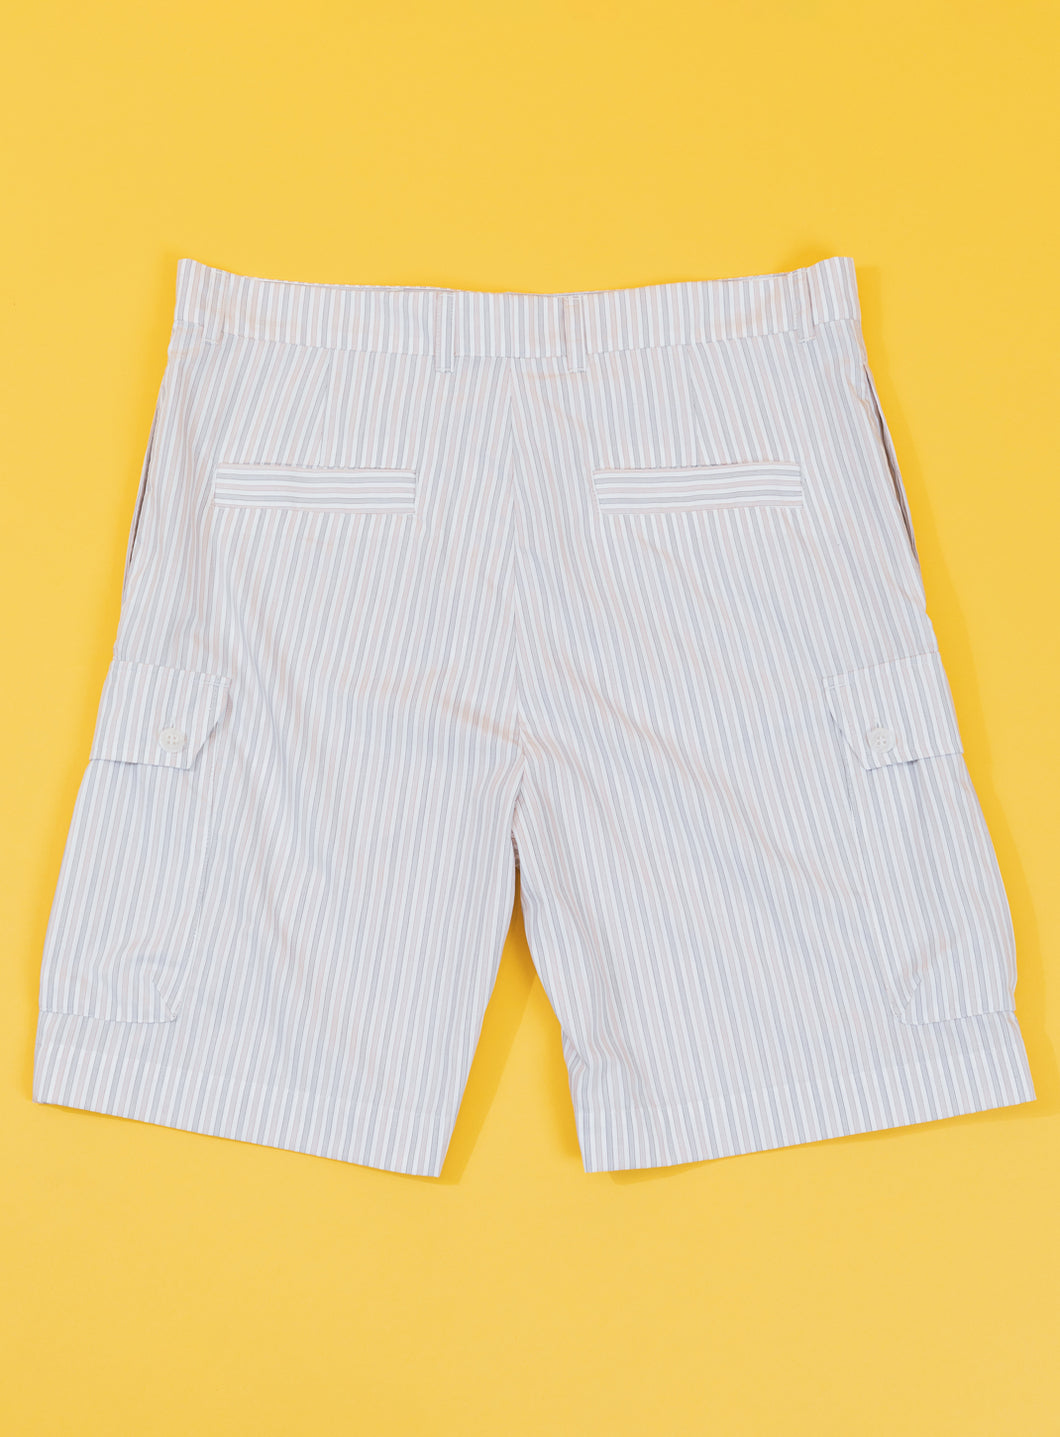 Bermuda Shorts with Envelope Pockets in White Poplin with Beige & Grey Stripes